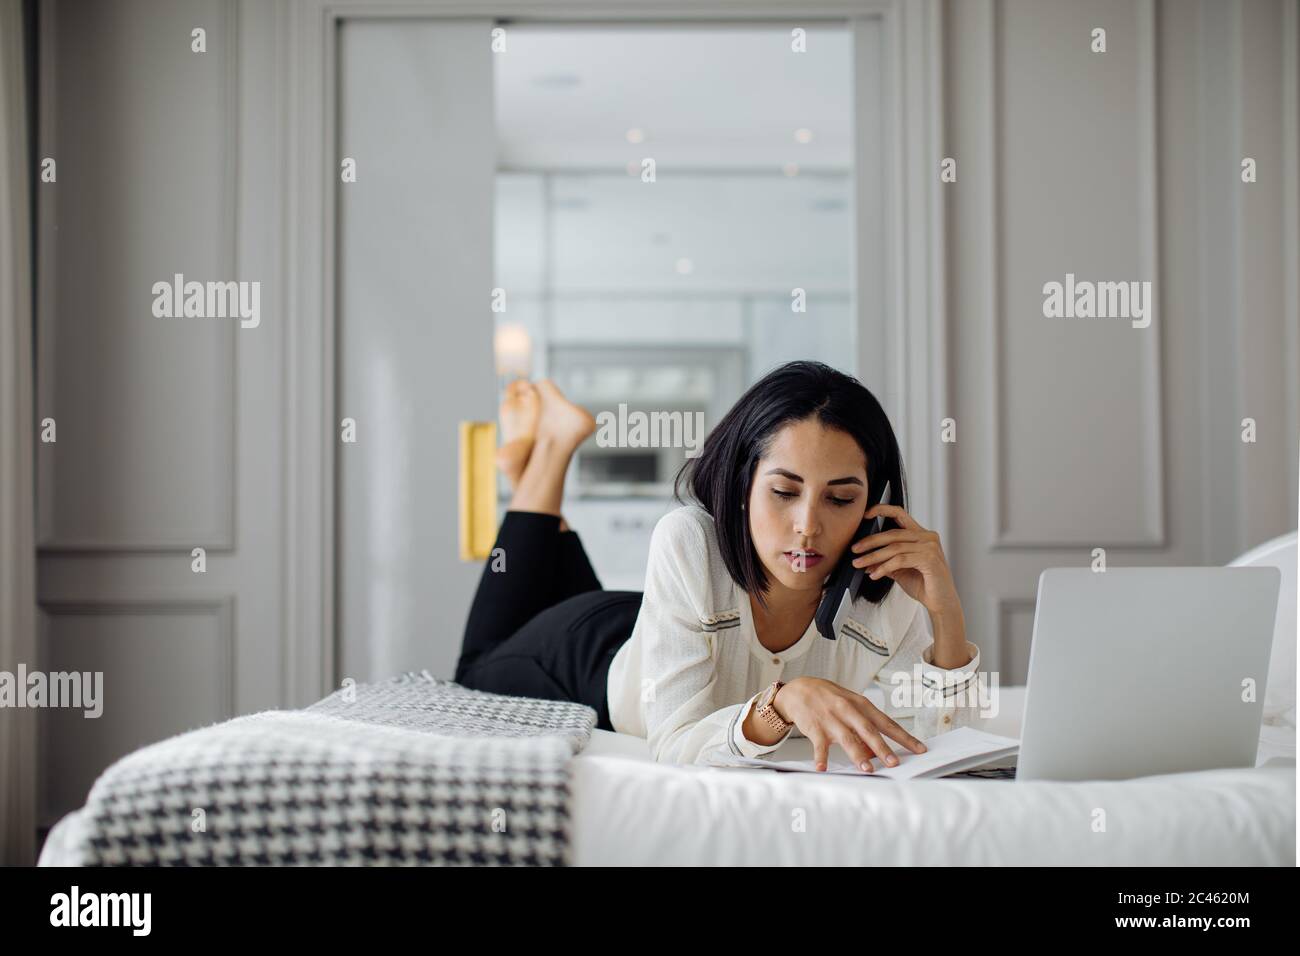 Businesswoman using smartphone and laptop in suite Stock Photo